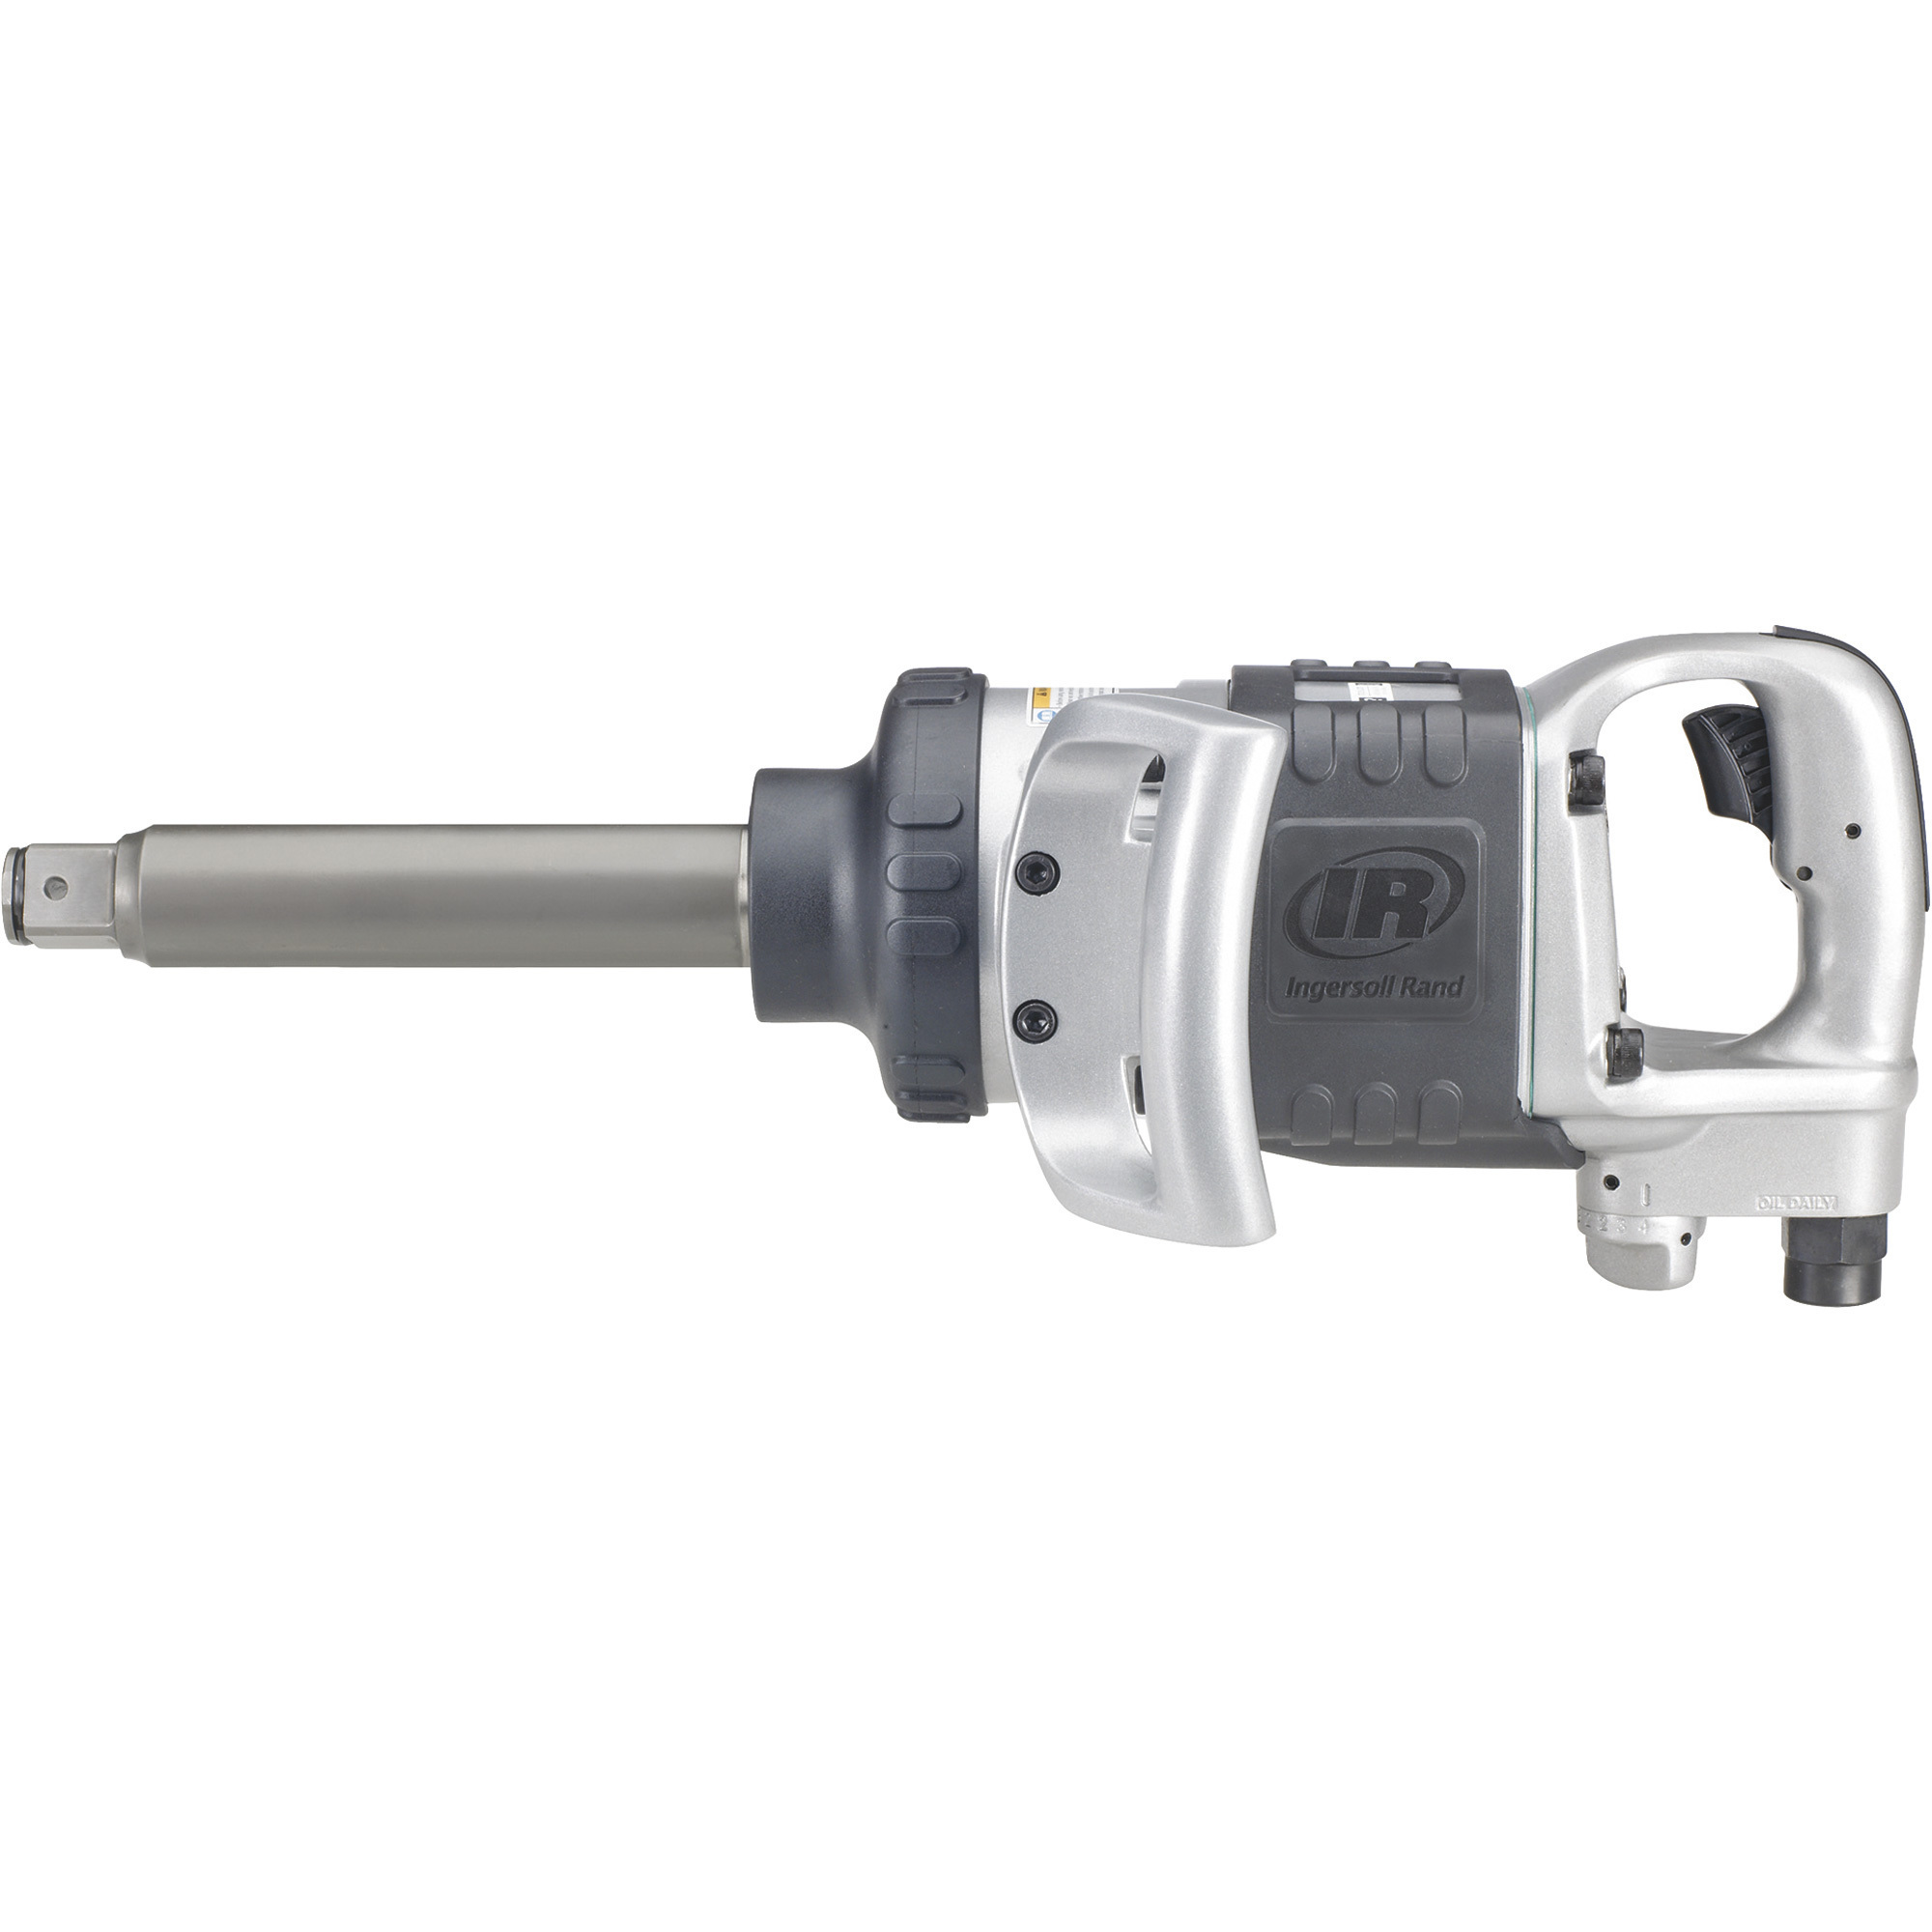 Ingersoll Rand Air Impact Wrench, 1Inch Drive, 10 CFM, 1475 Ft./Lbs. Torque, Model 285B-6